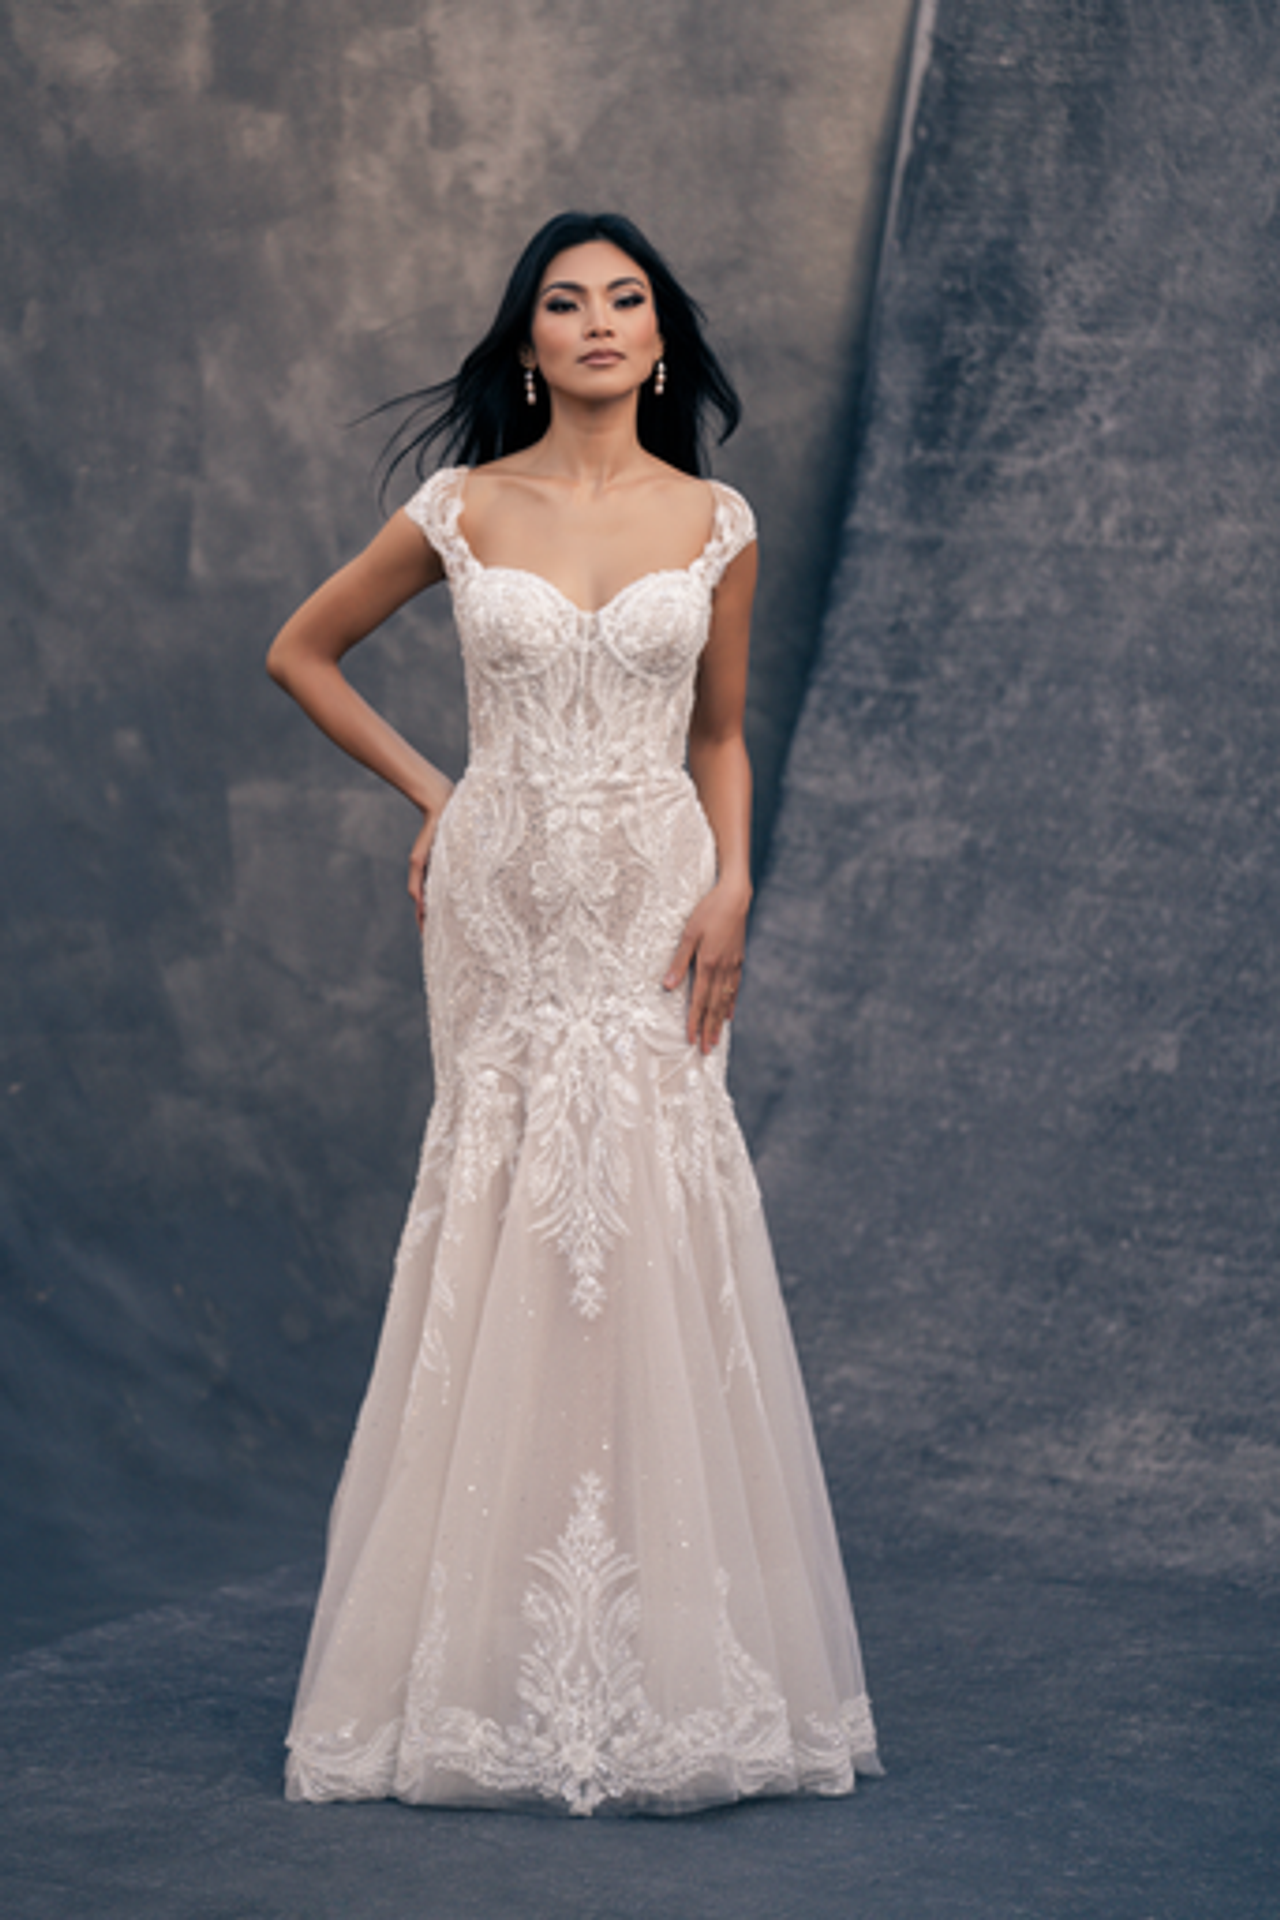 Delicate And Romantic Fit And Flare Gown by Allure Bridals